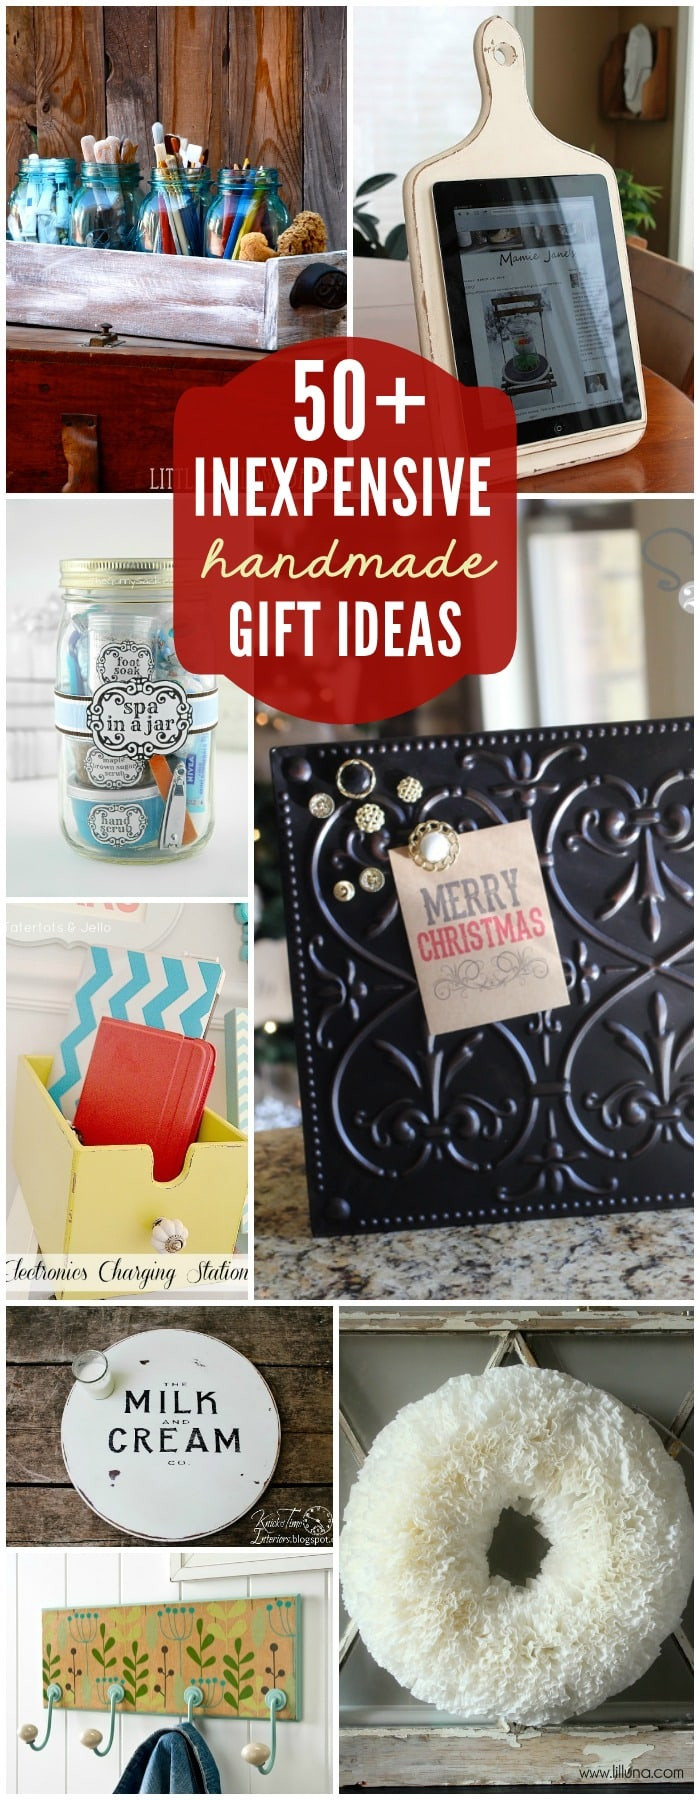 Best Diy Christmas Gifts
 75 Gift Ideas under $5